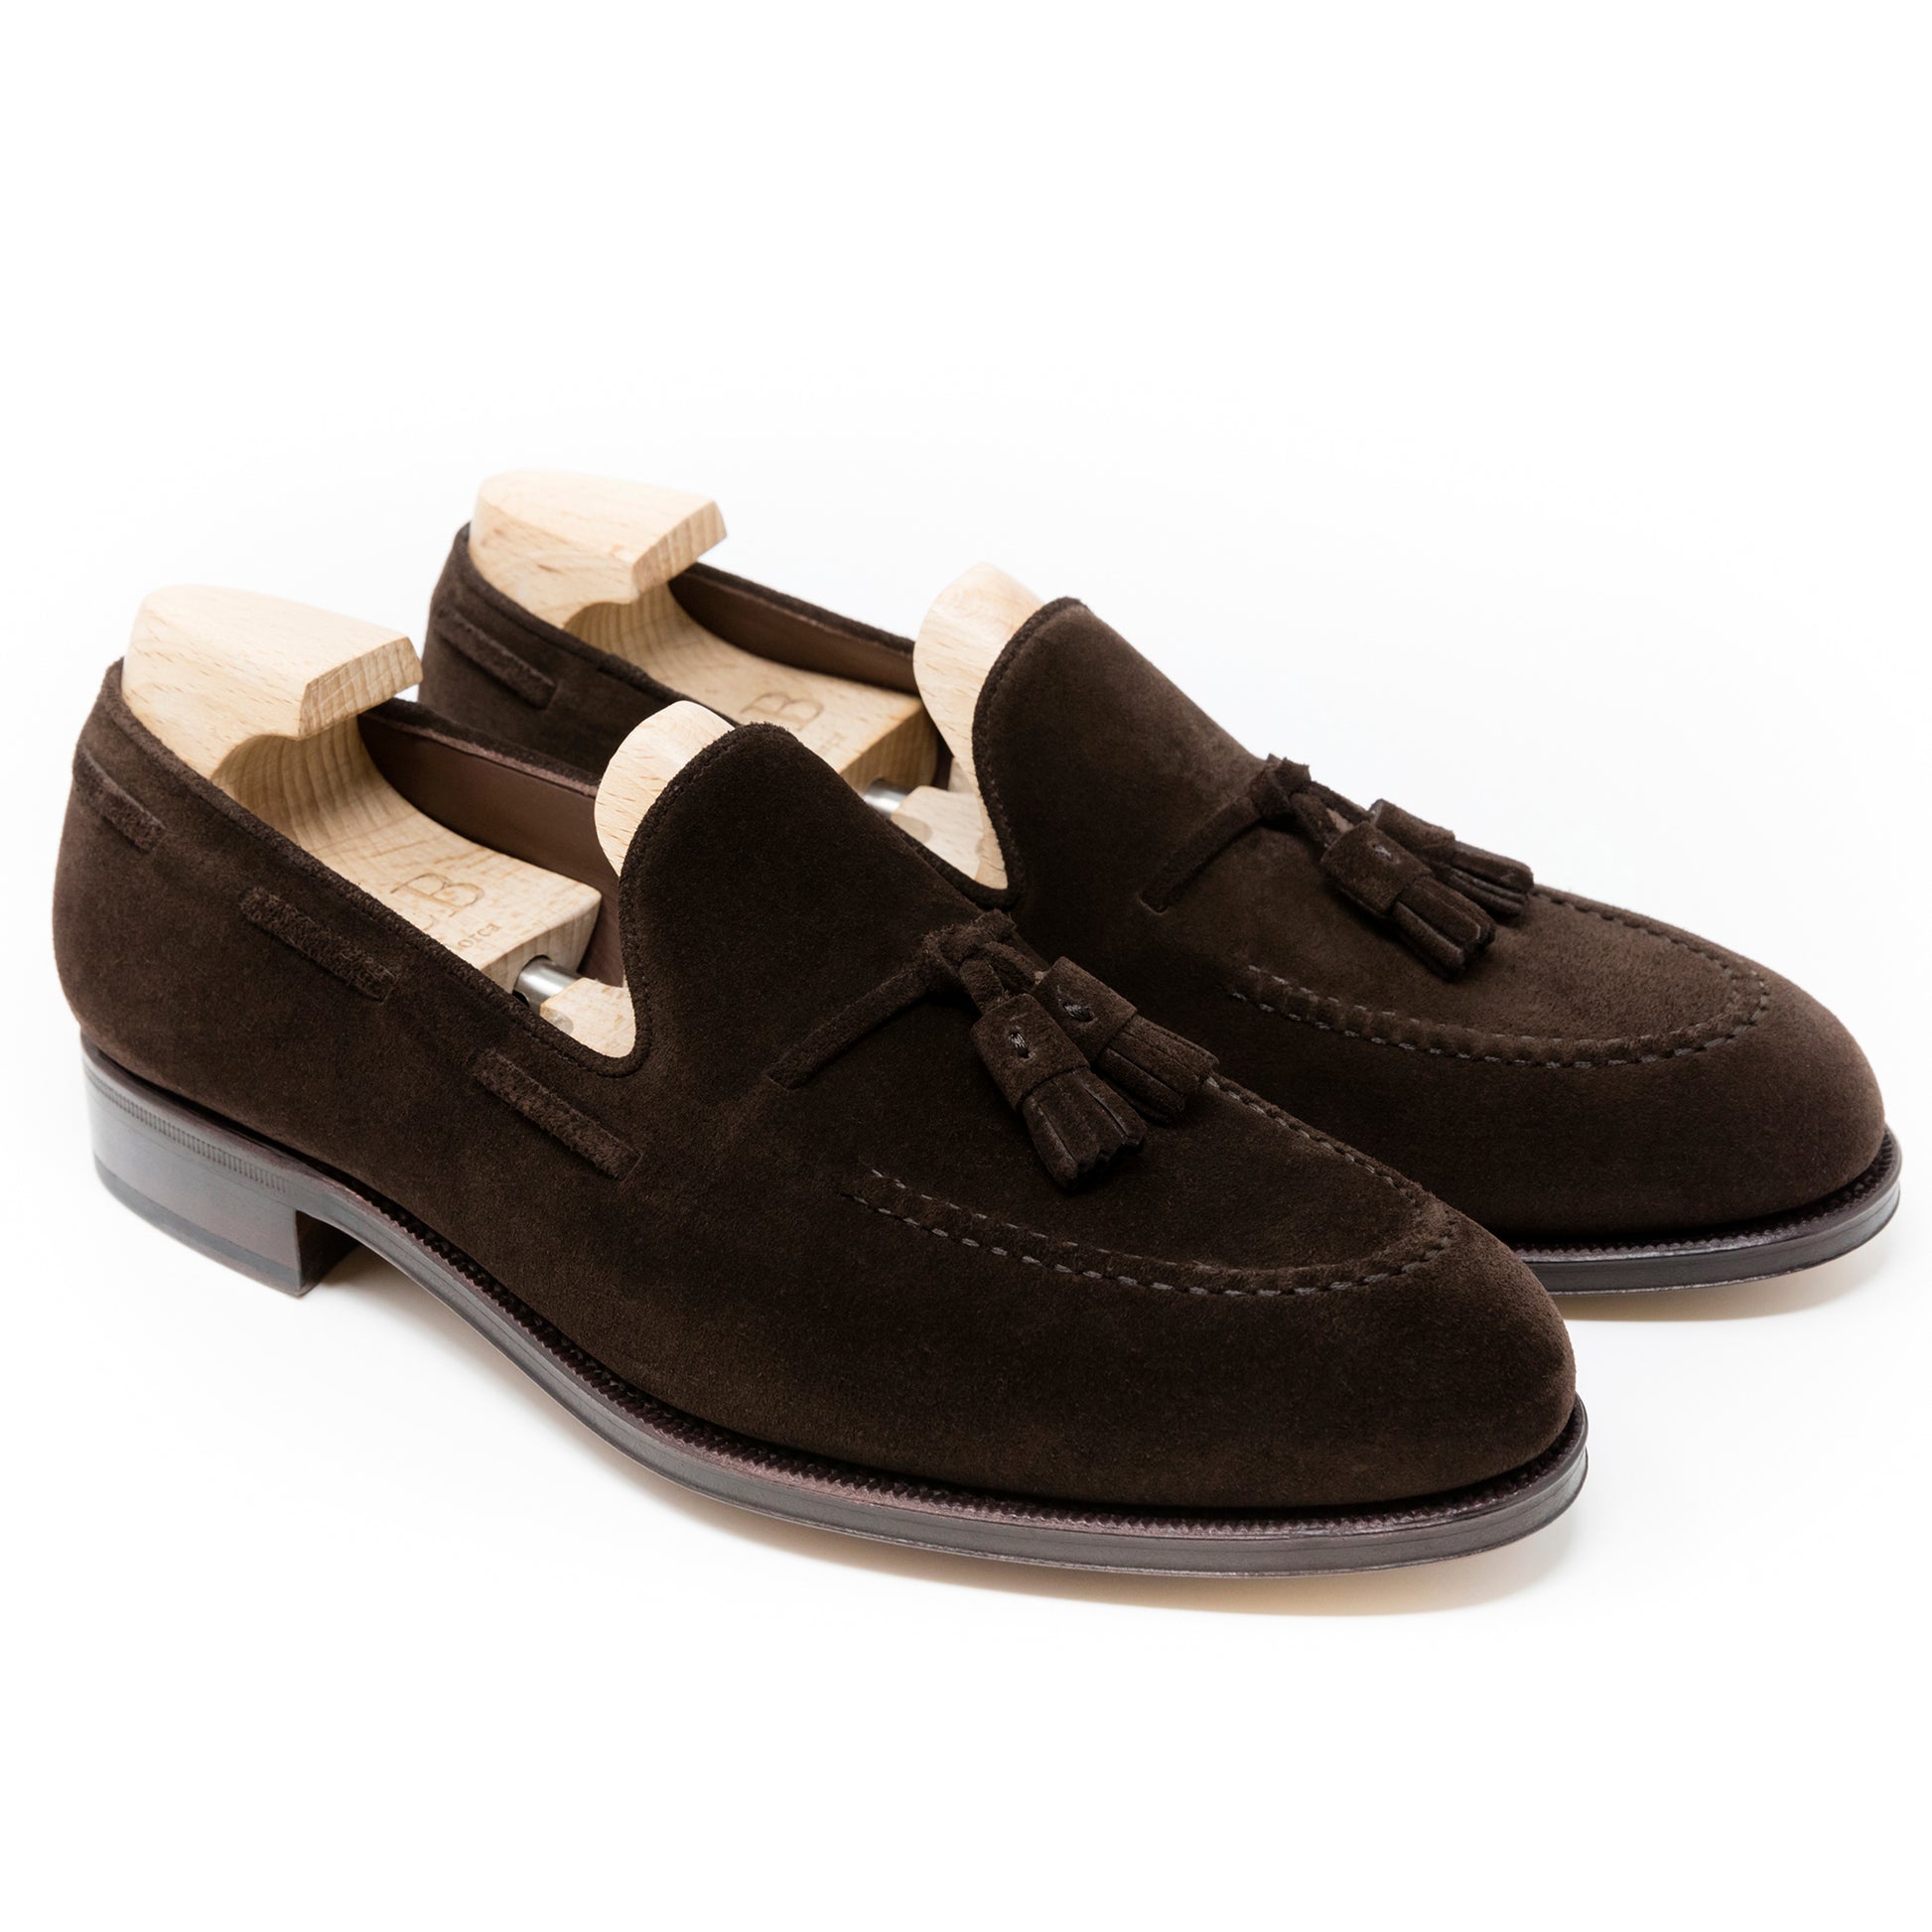 TLB Mallorca leather shoes 656 / JONES / SUEDE BROWN